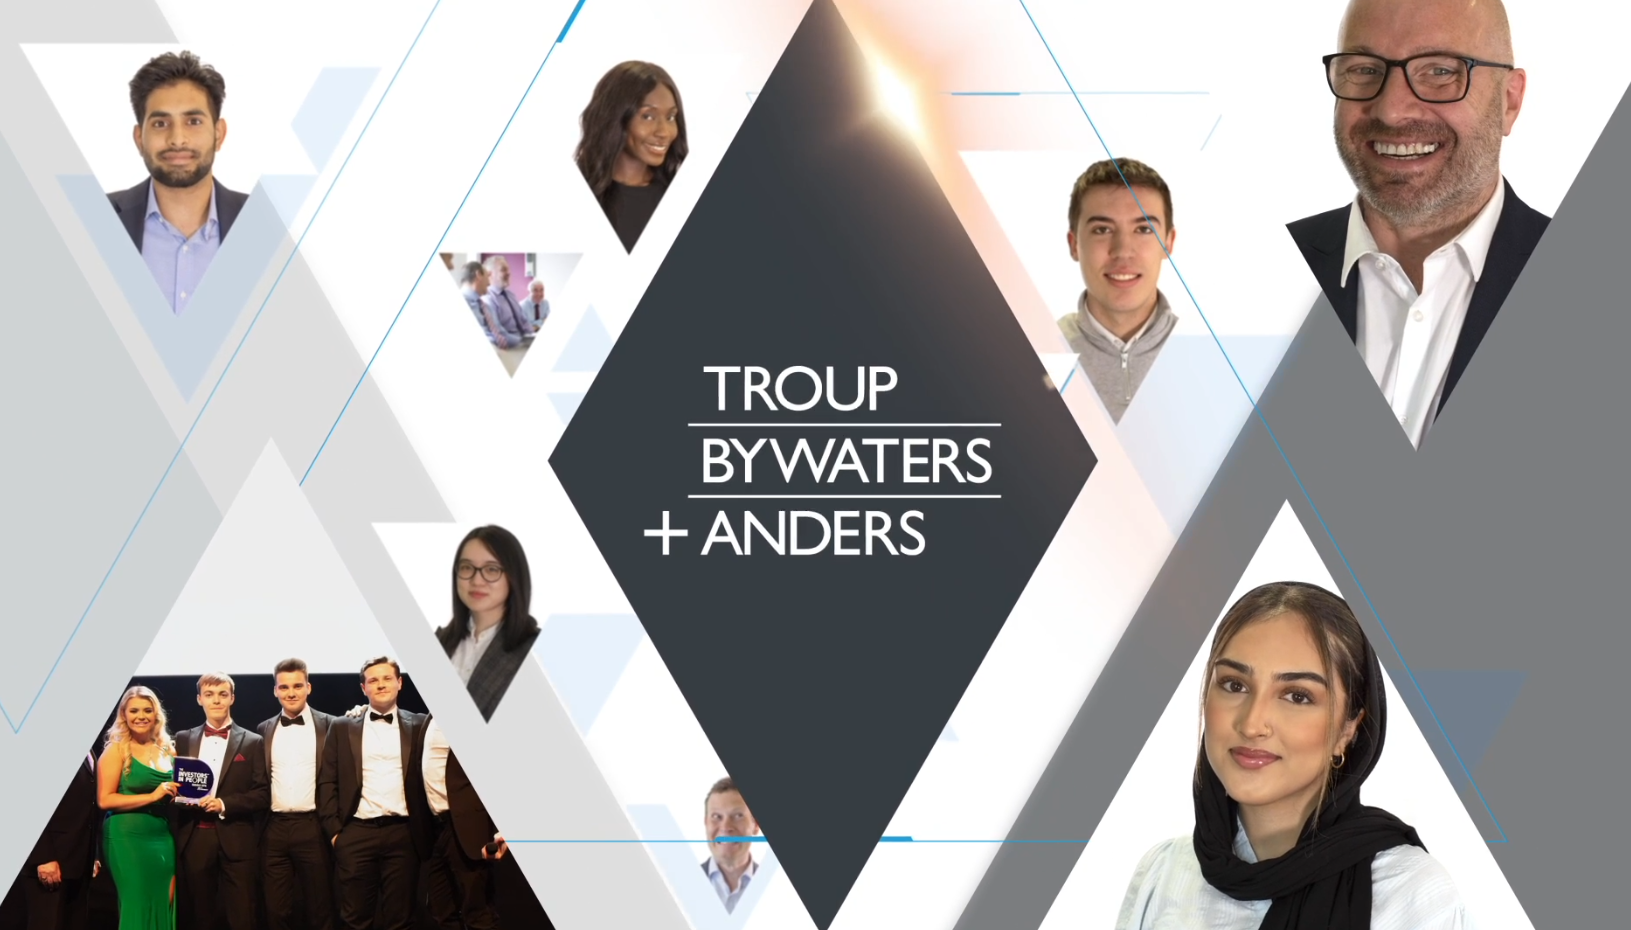 Troup Bywaters + Anders - Our Journey